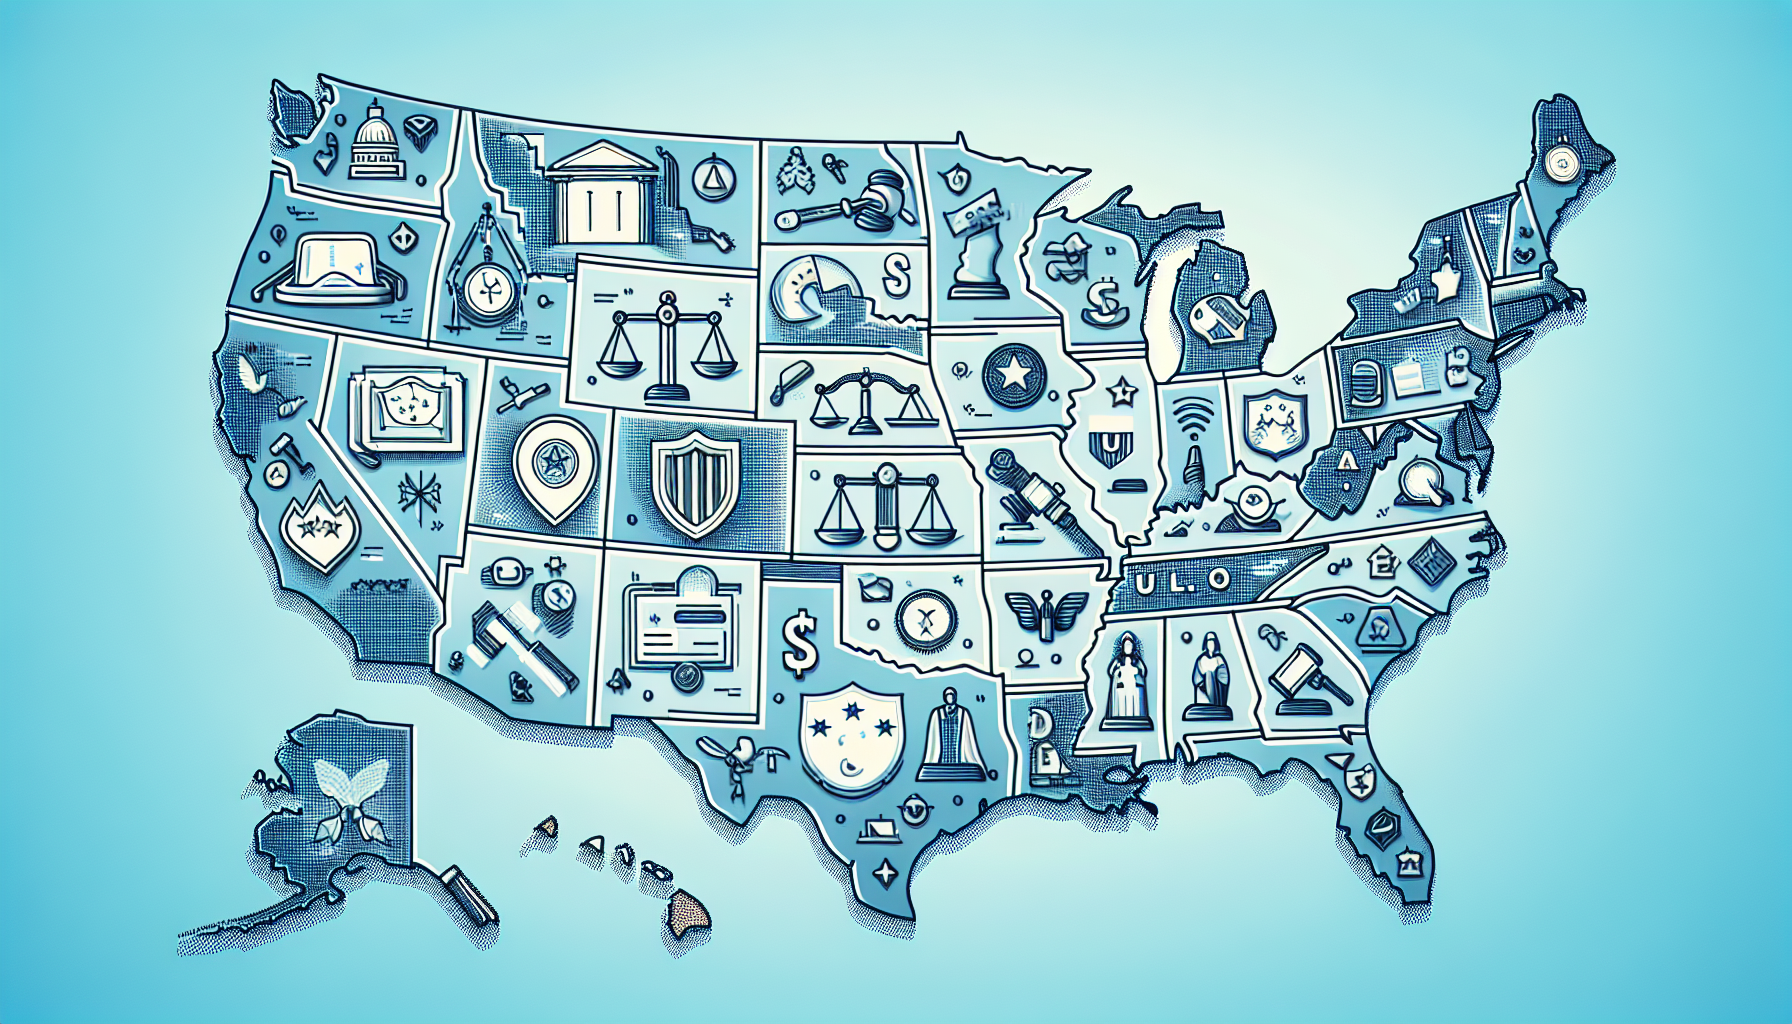 Illustration of a map of the United States with employment law icons